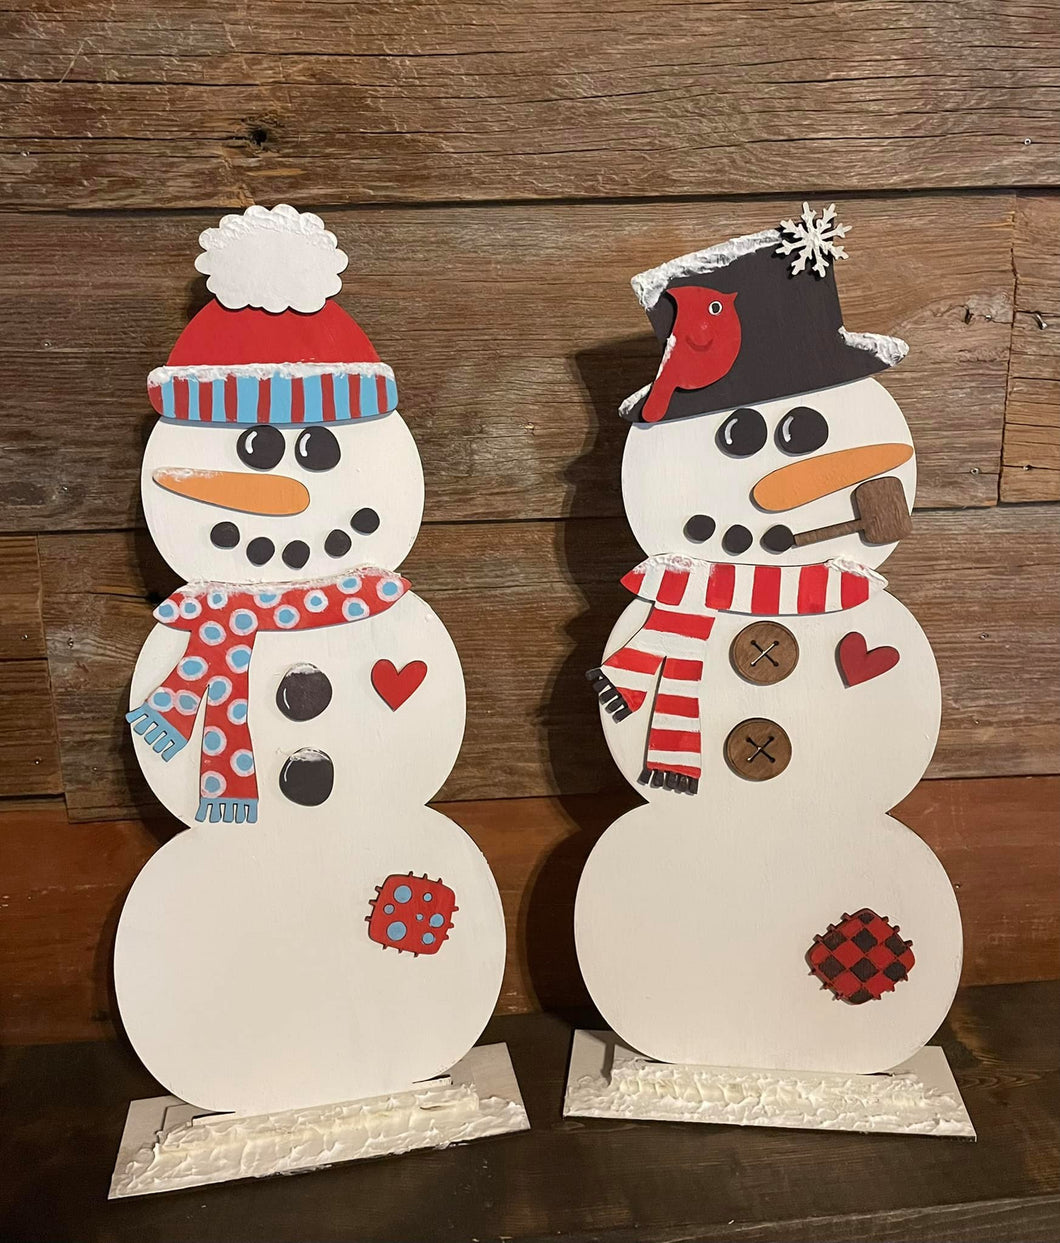 Standing Snowman Set of Two 18